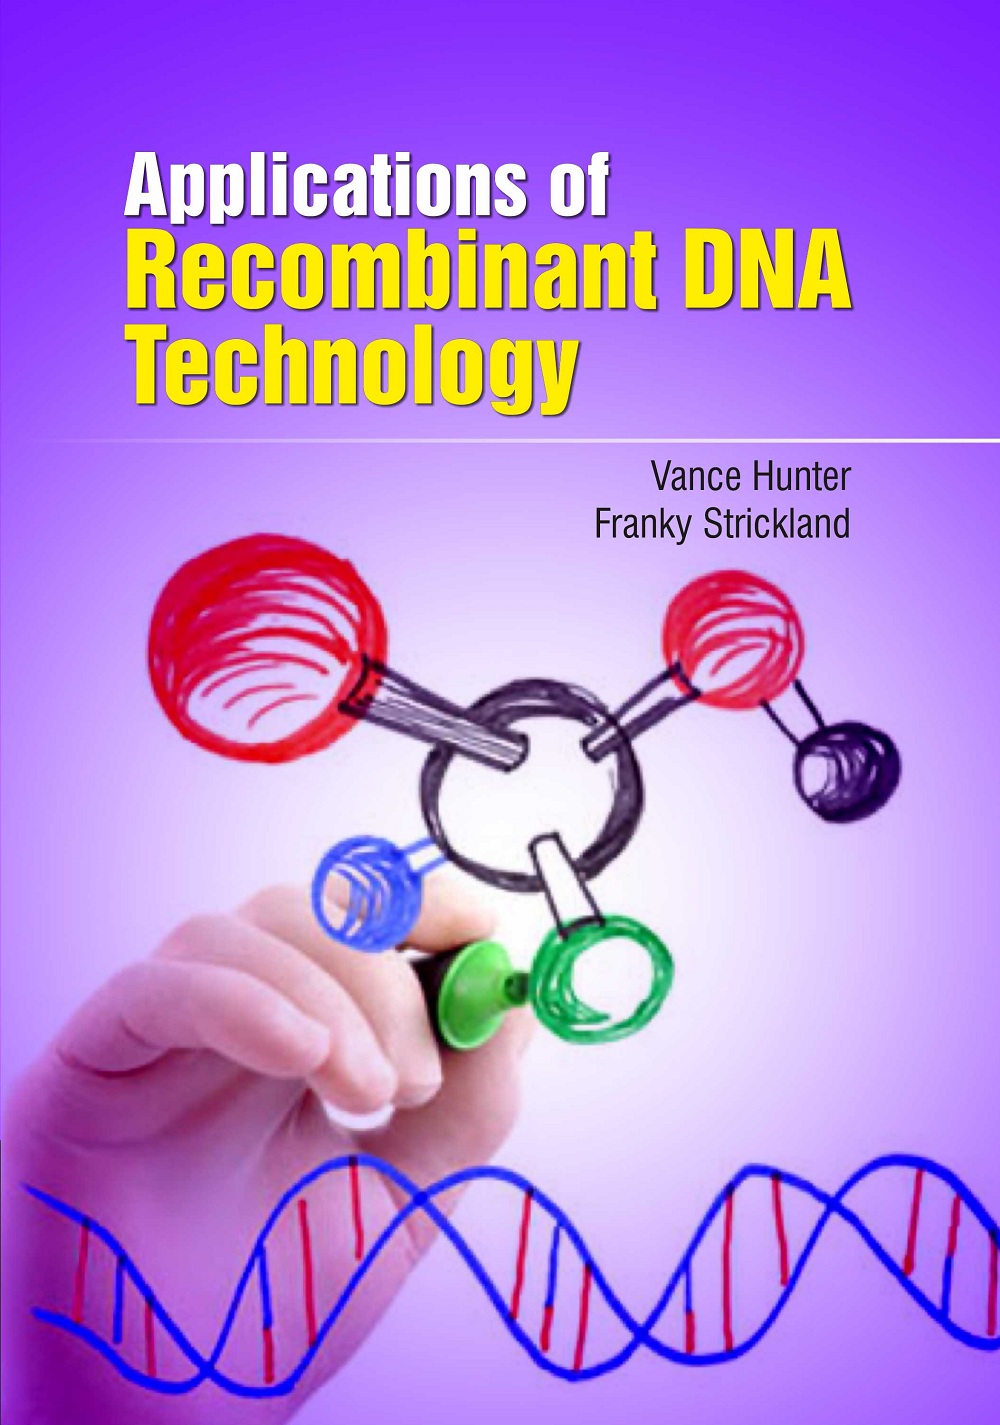 catalog/books/Applications of Recombinant DNA Technology.jpg